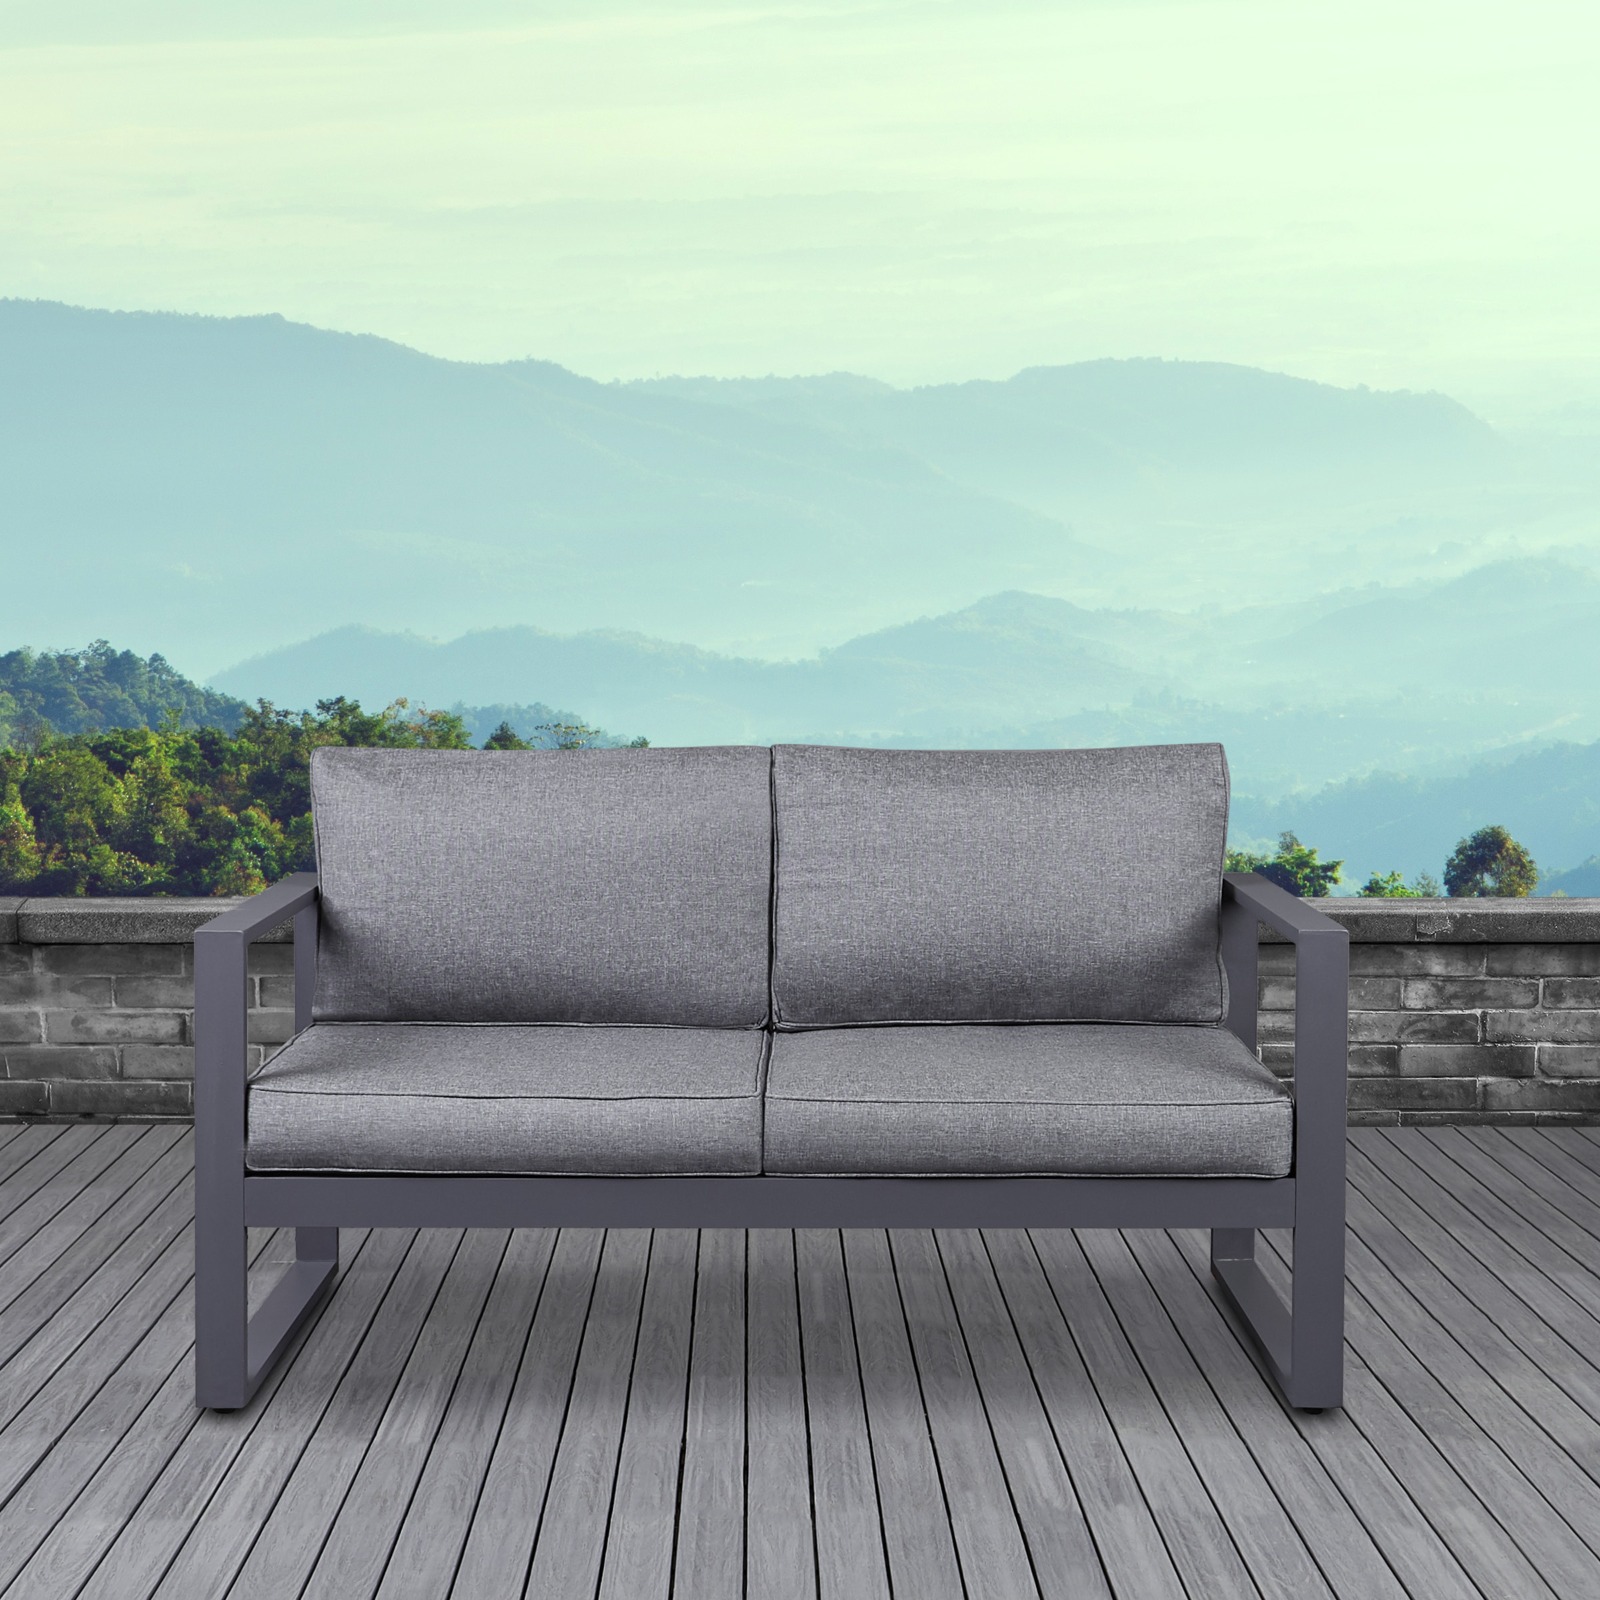 Baltic Outdoor Loveseat Patio Loveseat Outdoor Two Seat Bench Patio Furniture